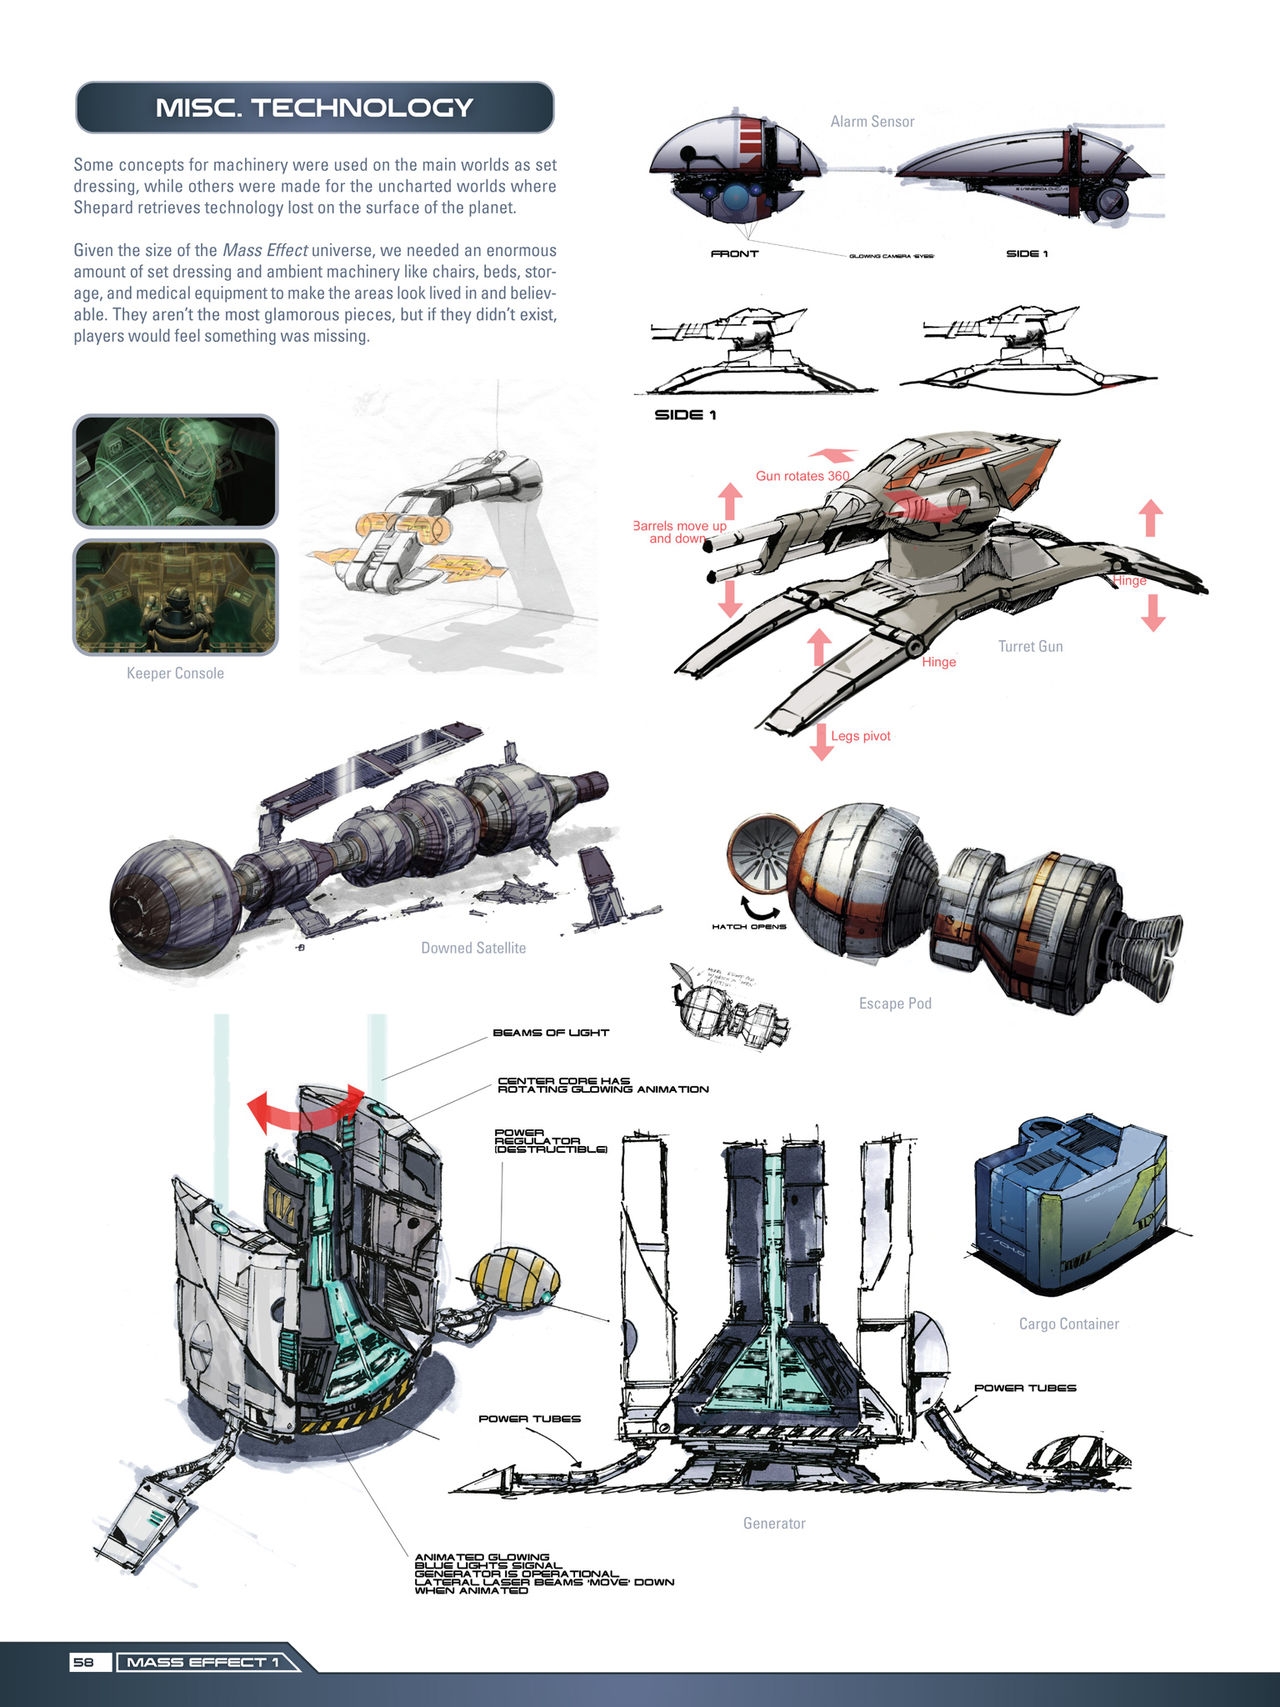 The Art of the Mass Effect Trilogy - Expanded Edition 58